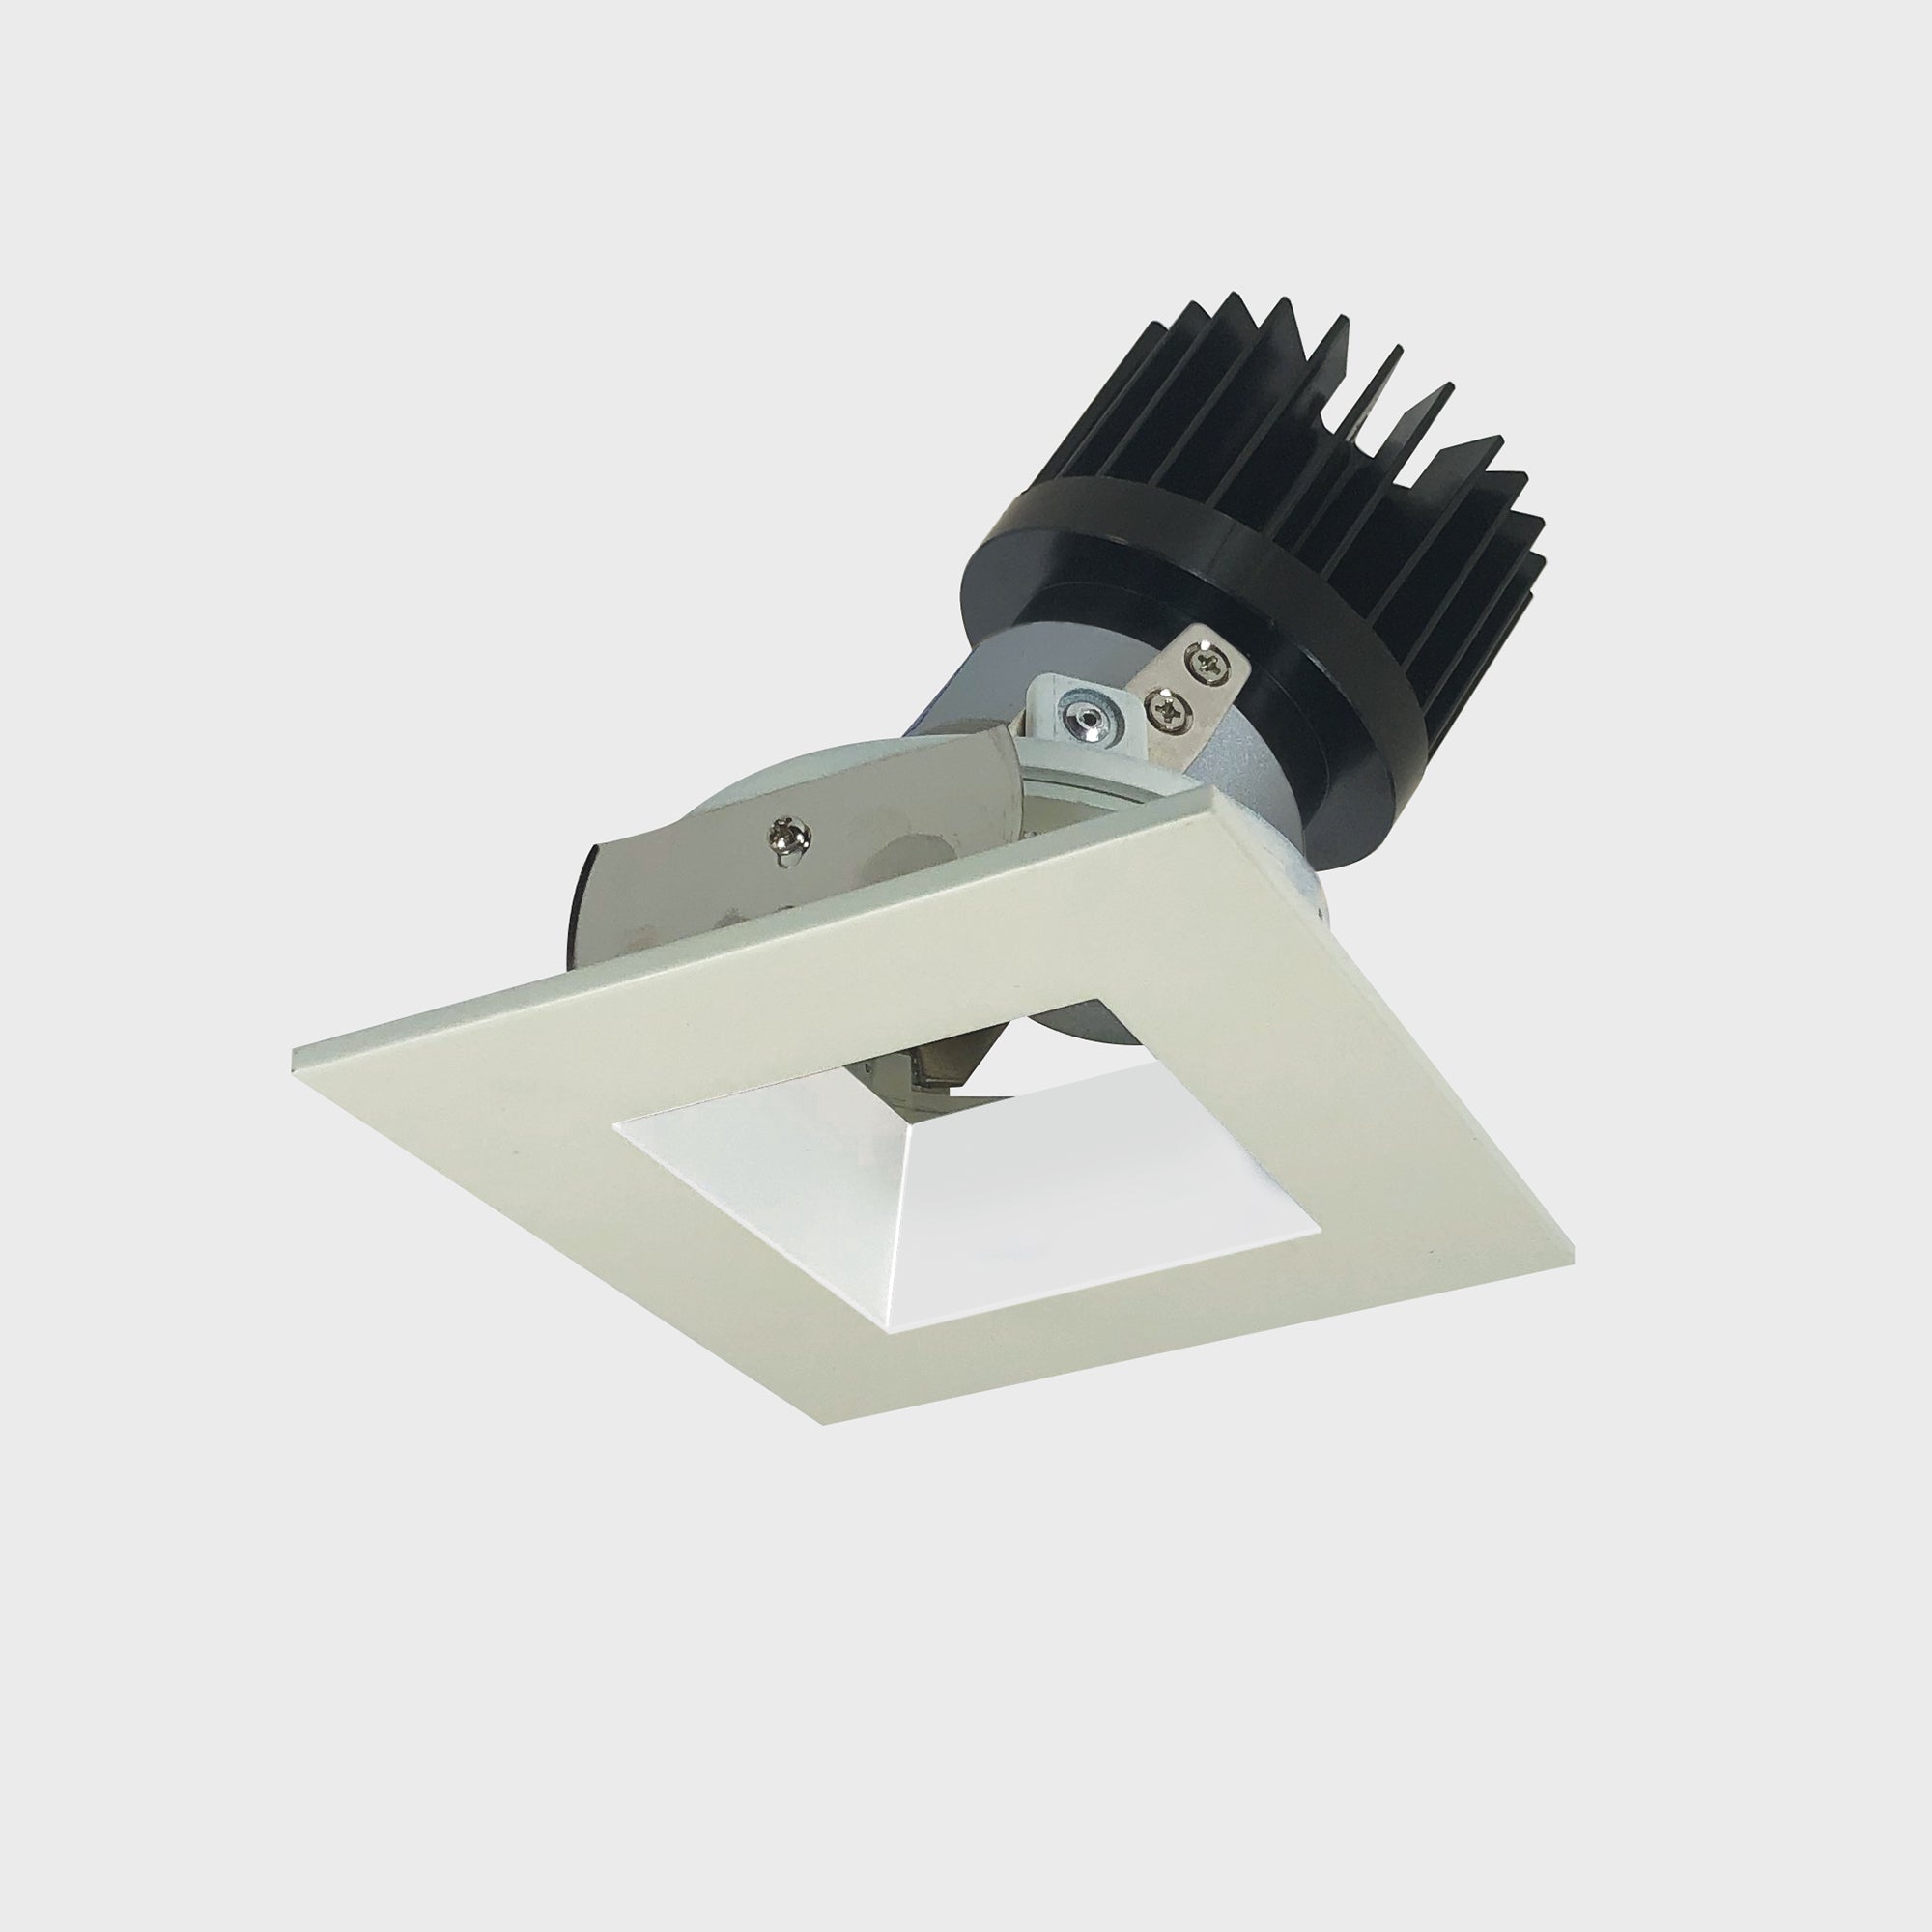 Nora Lighting NIO-4SDSQ40XWW/HL 4" Iolite LED Square Adjustable Reflector With Square Aperture, 1500lm/2000lm (varies by housing), 4000K - White Reflector / White Flange